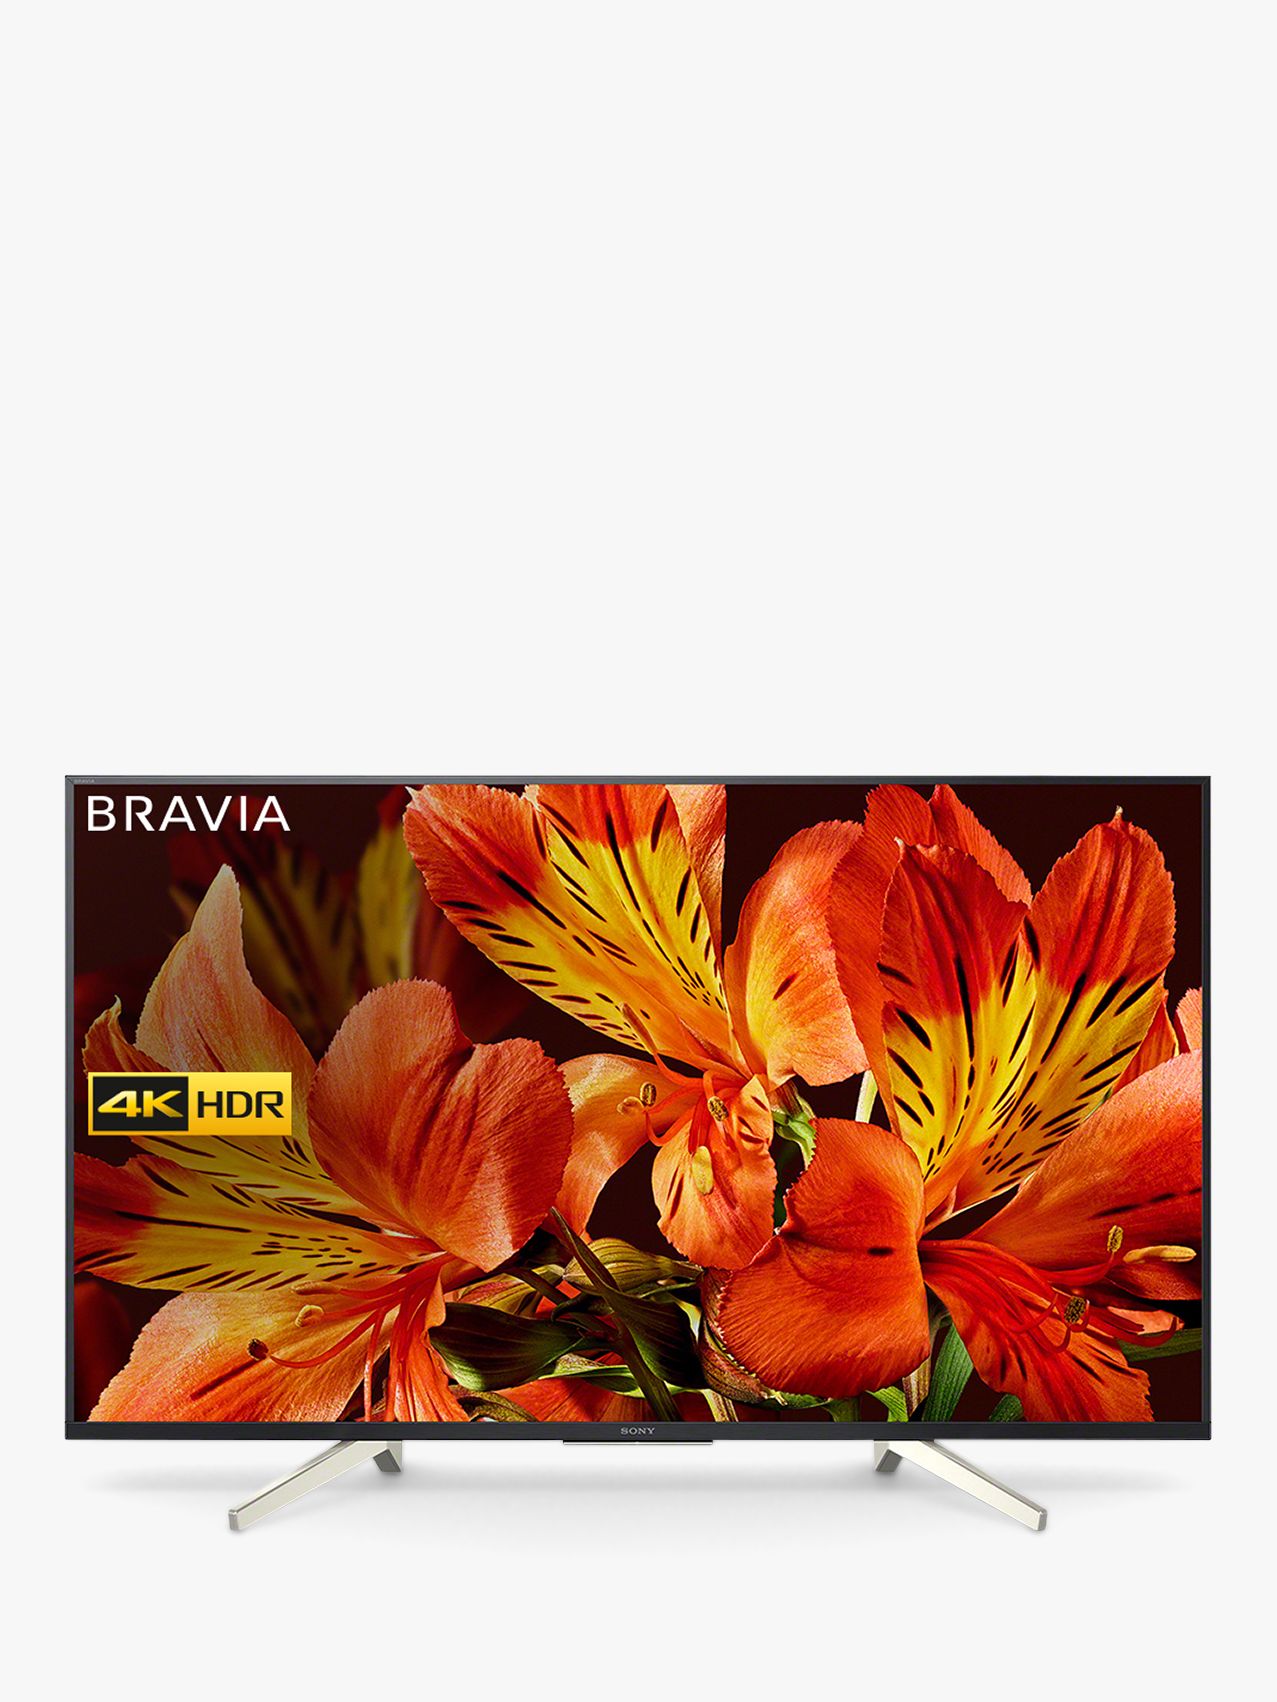 Sony Bravia KD55XF8505 LED HDR 4K Ultra HD Smart Android TV, 55" with Freeview HD & Youview, Black